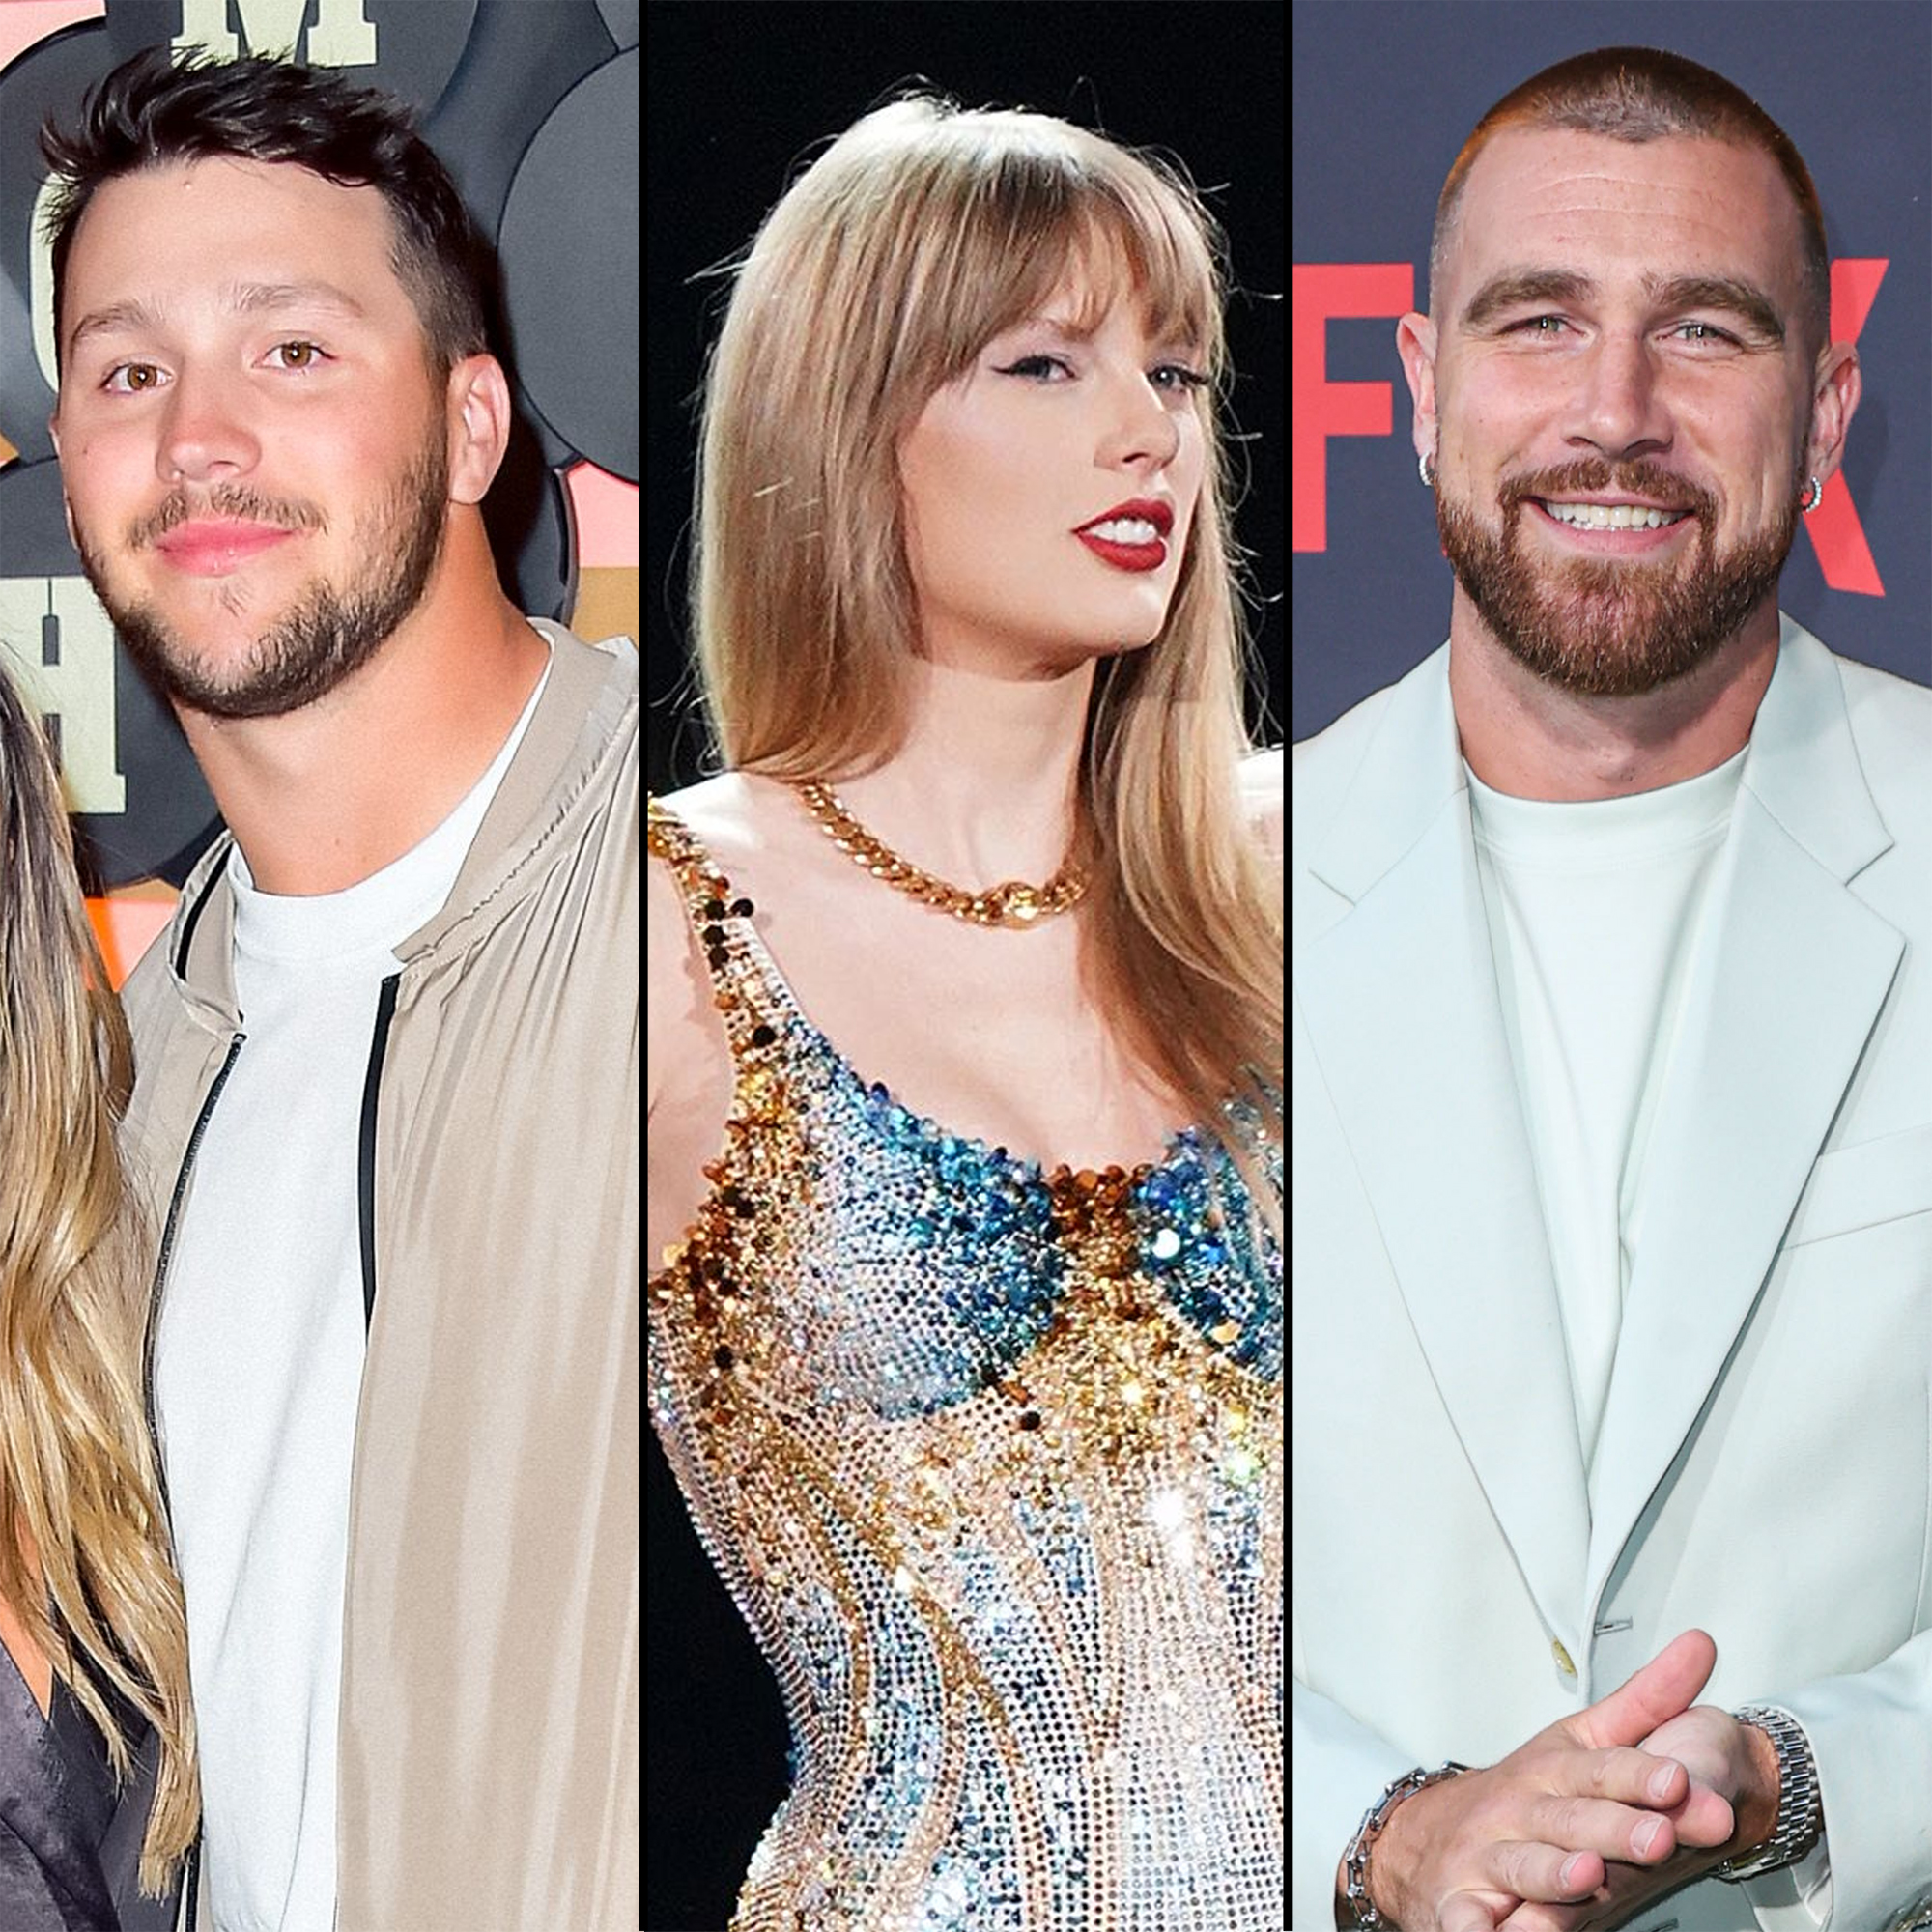 Travis Kelce's Taylor Swift-inspired outfit debunked